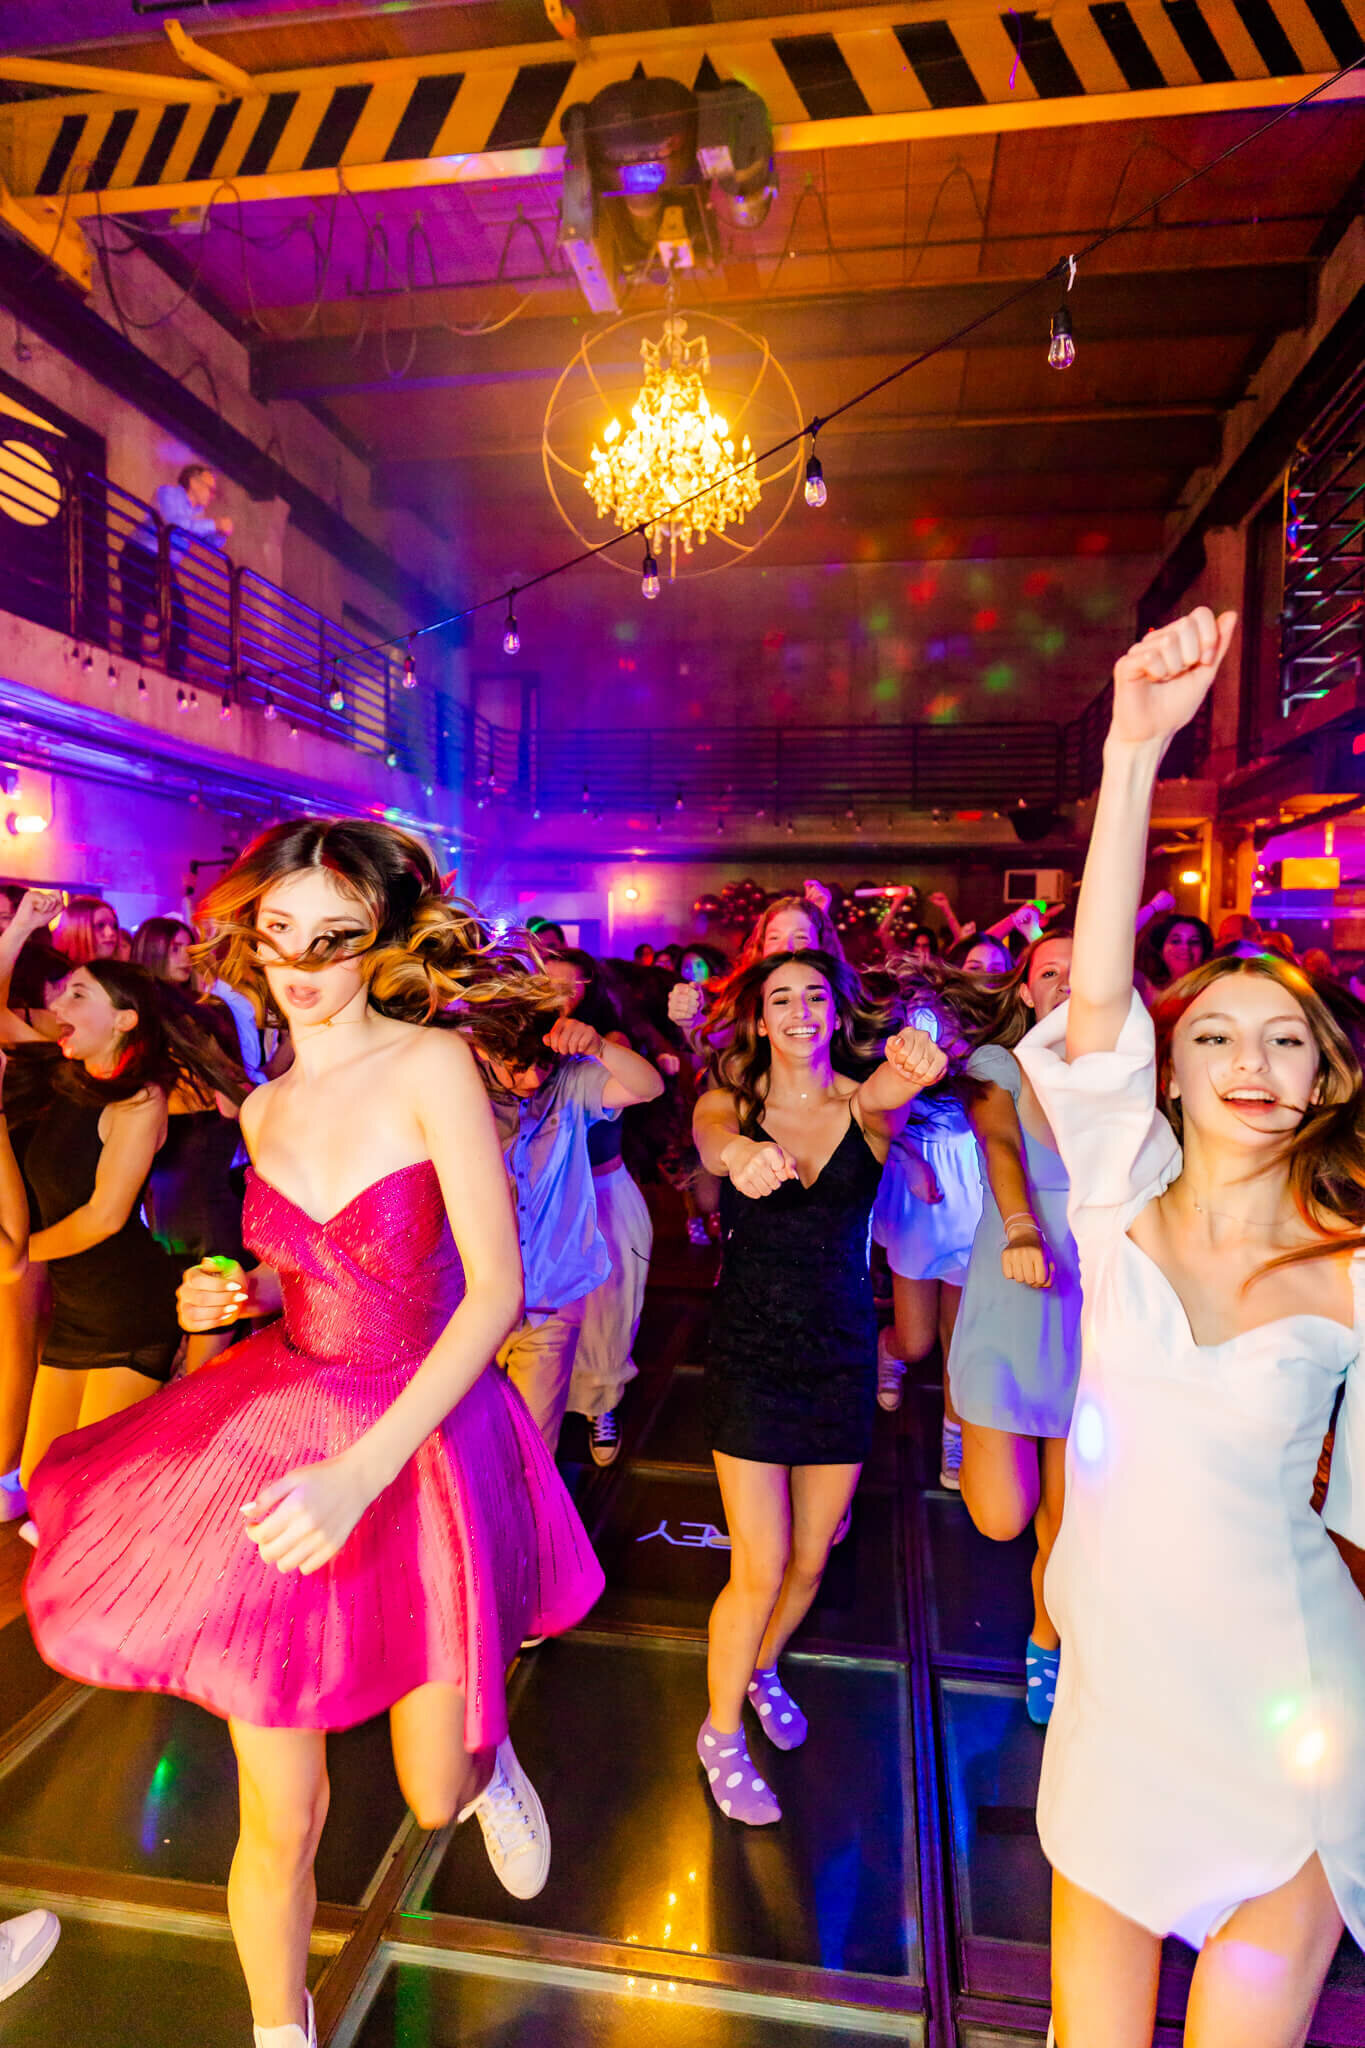 A Bellevue Bar and Bat Mitzvah Photography image of a girl in a pink dress dancing with her friends on a lively dance floor